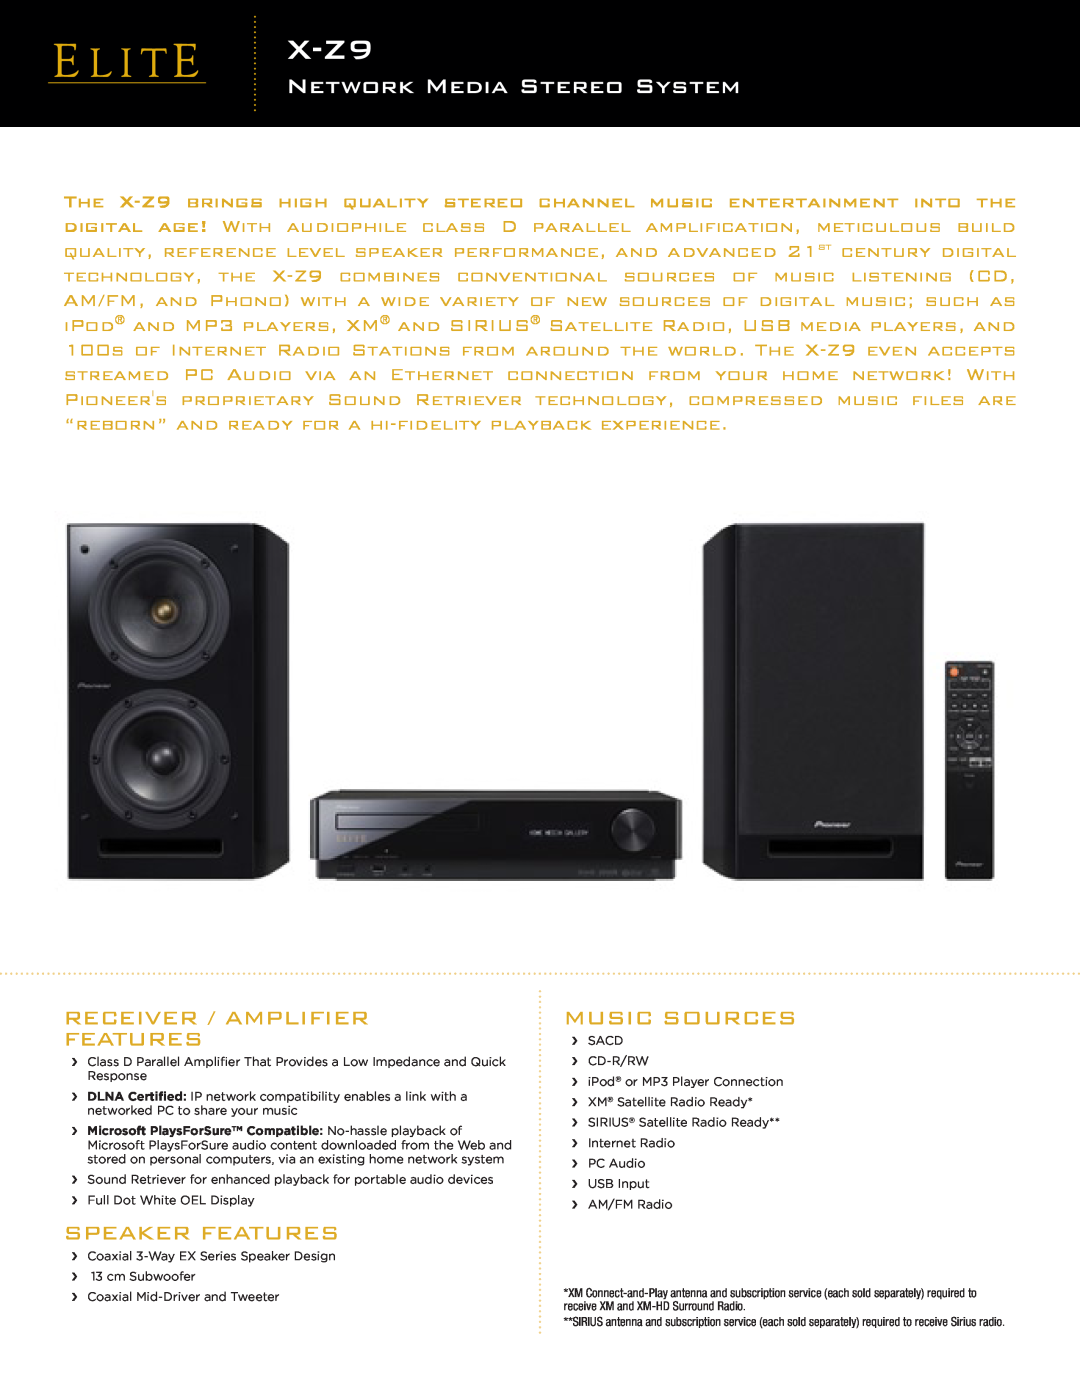 Pioneer X-Z9 manual XDV-Z9-58AV, Network Media Stereo System, Receiver / Amplifier Features, Speaker Features 